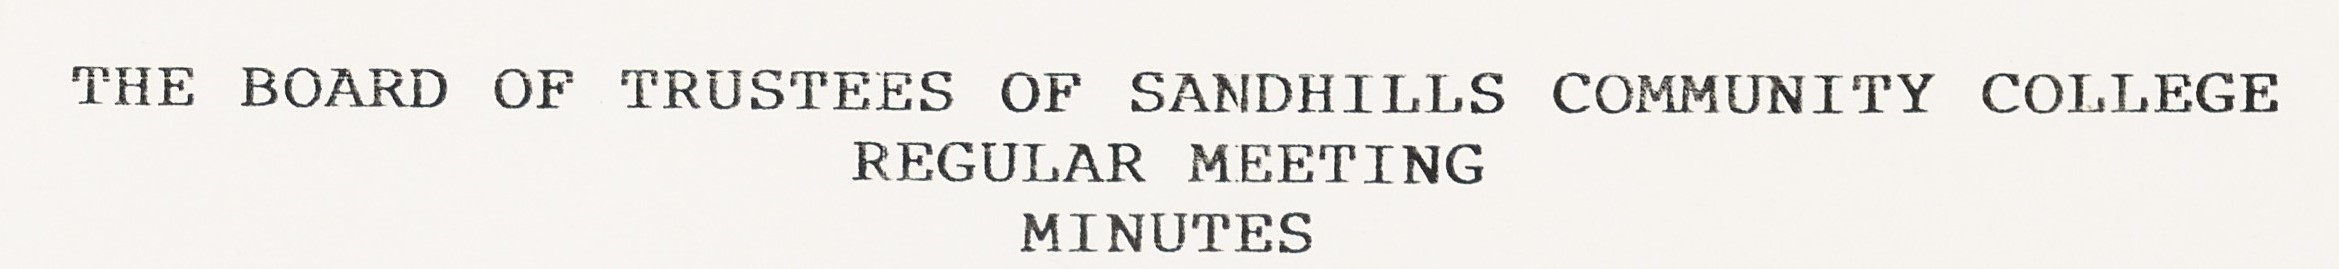 The text on the image reads: the board of trustees of sandhills community college regular meeting minutes.